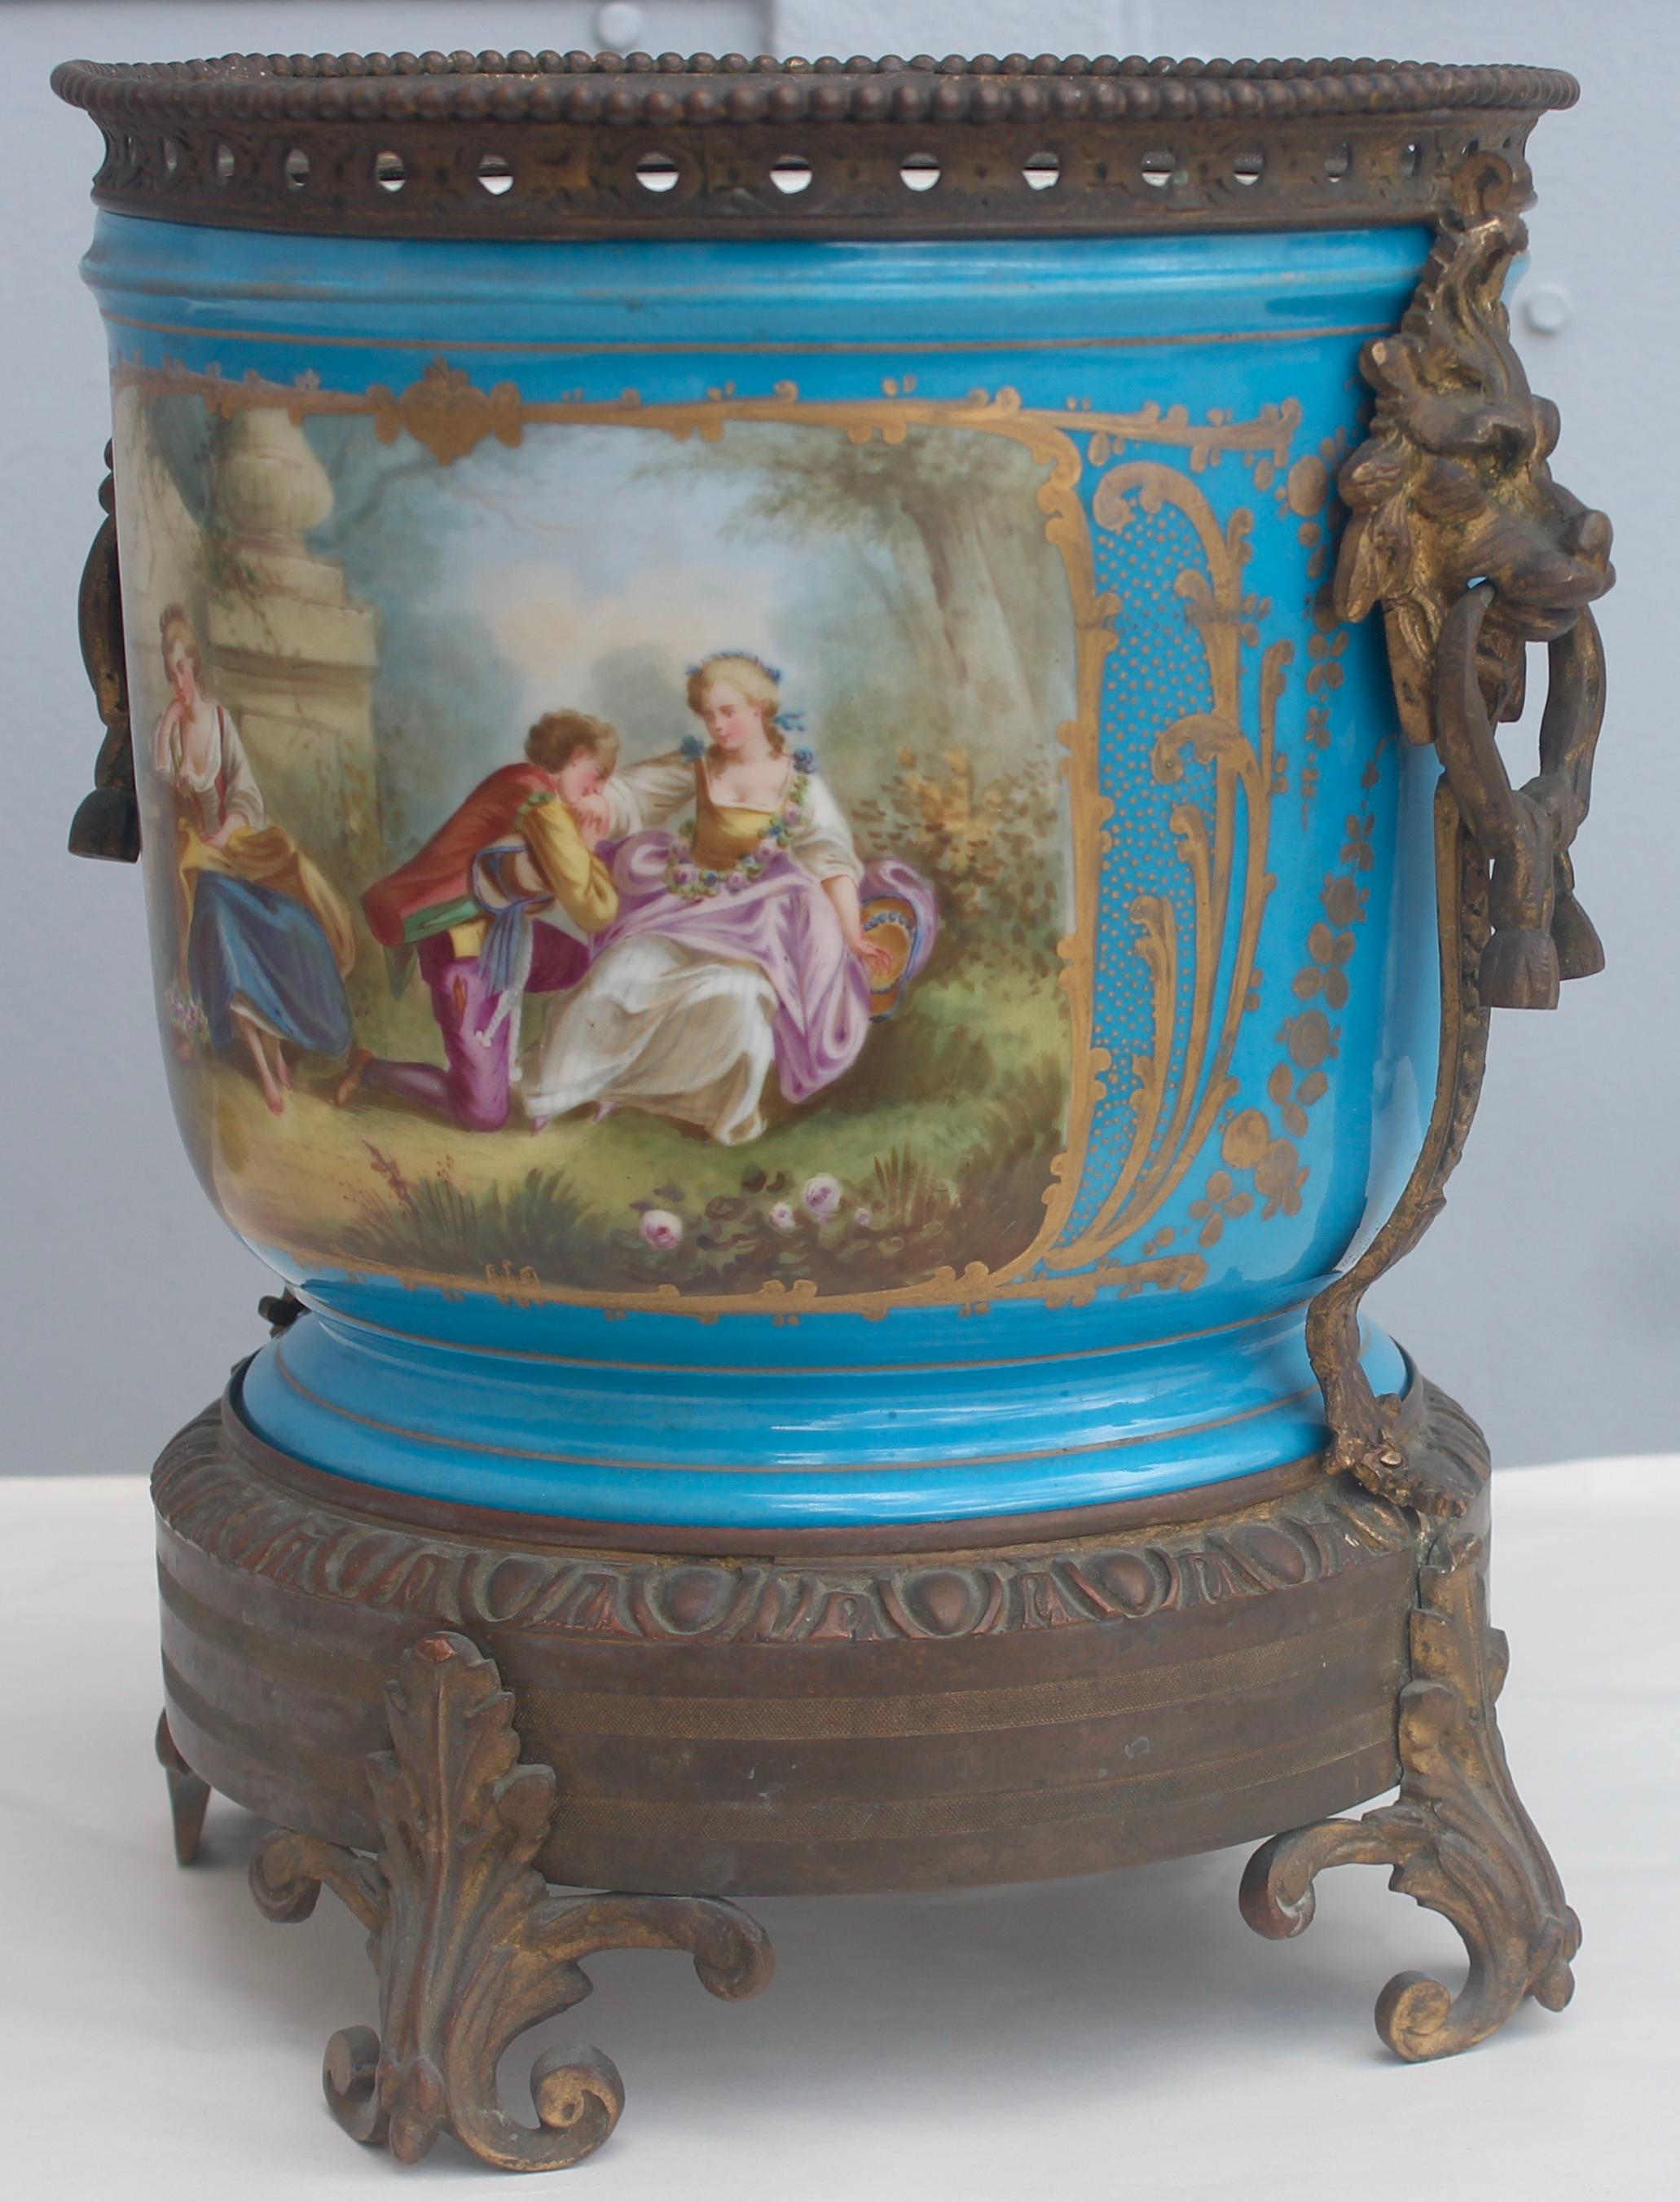 Antique Sèvres blue Céleste Porcelain cachepot
Romantics scenes hand painted on the front reserves and flowers on the verso.
Ormolu-mounted with a gilt bronze base and a gadrooned edge on the rims.
Gilt bronze lions masks with rings in their